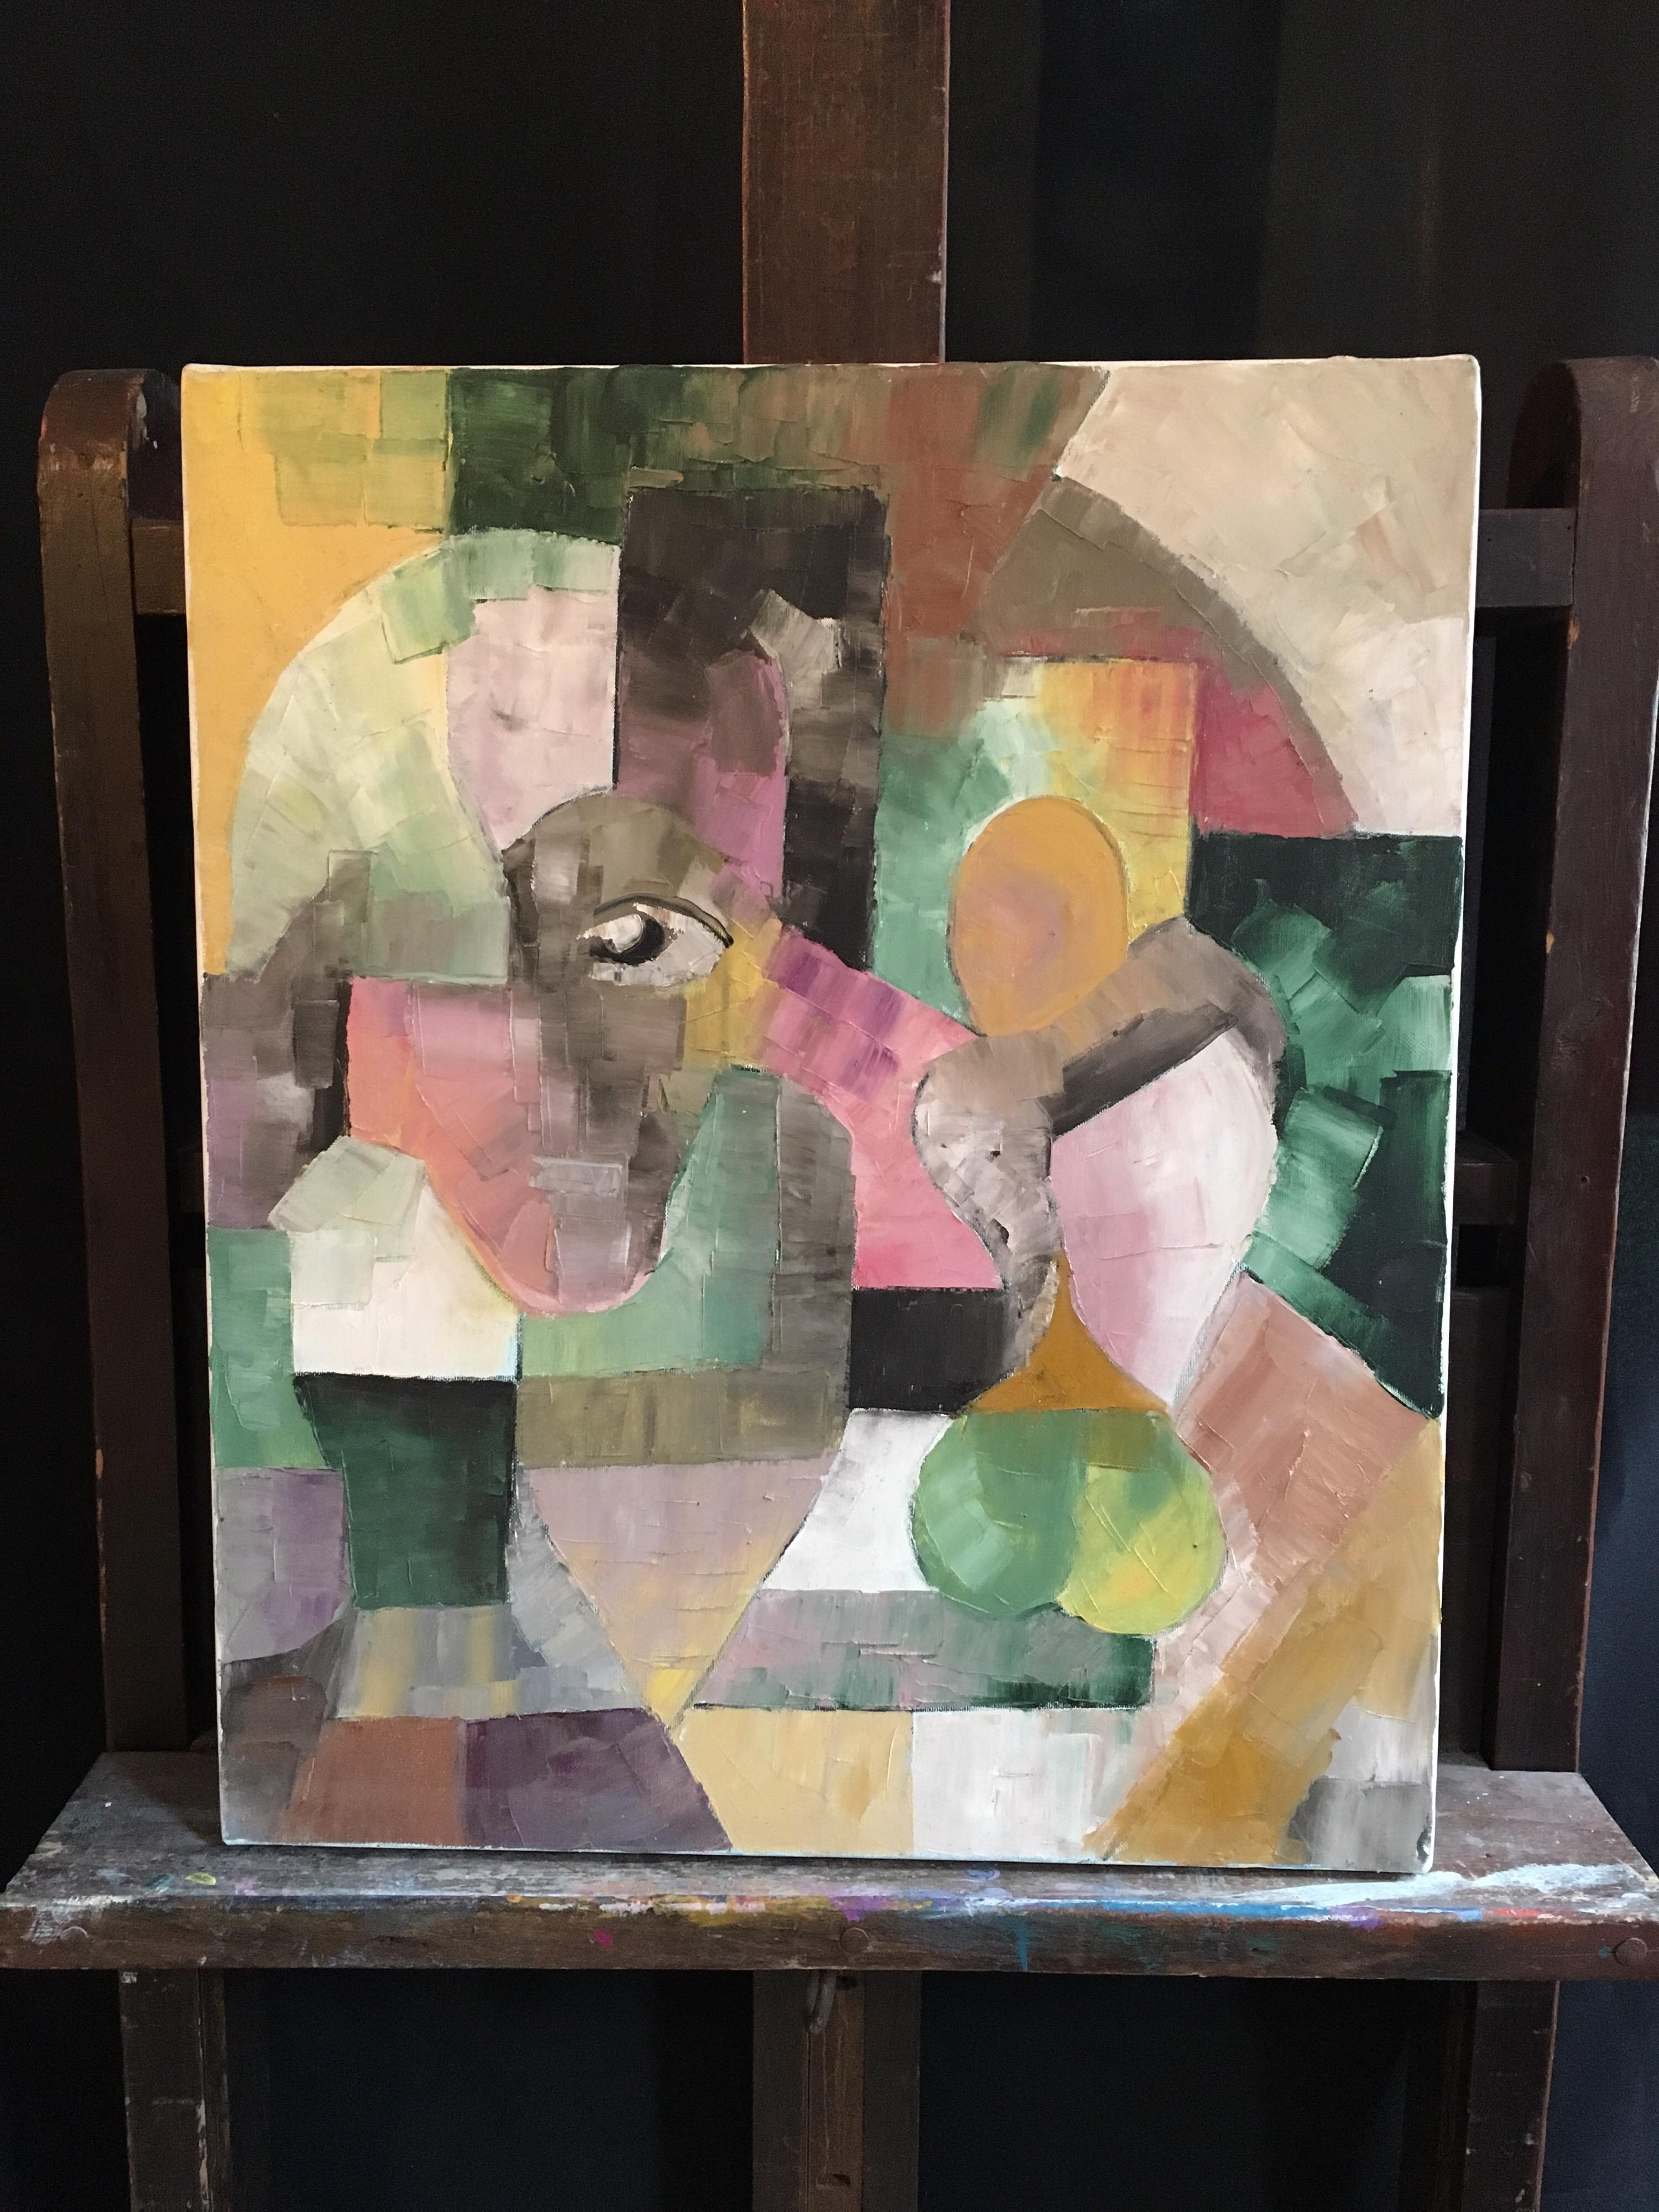 cubist style of painting